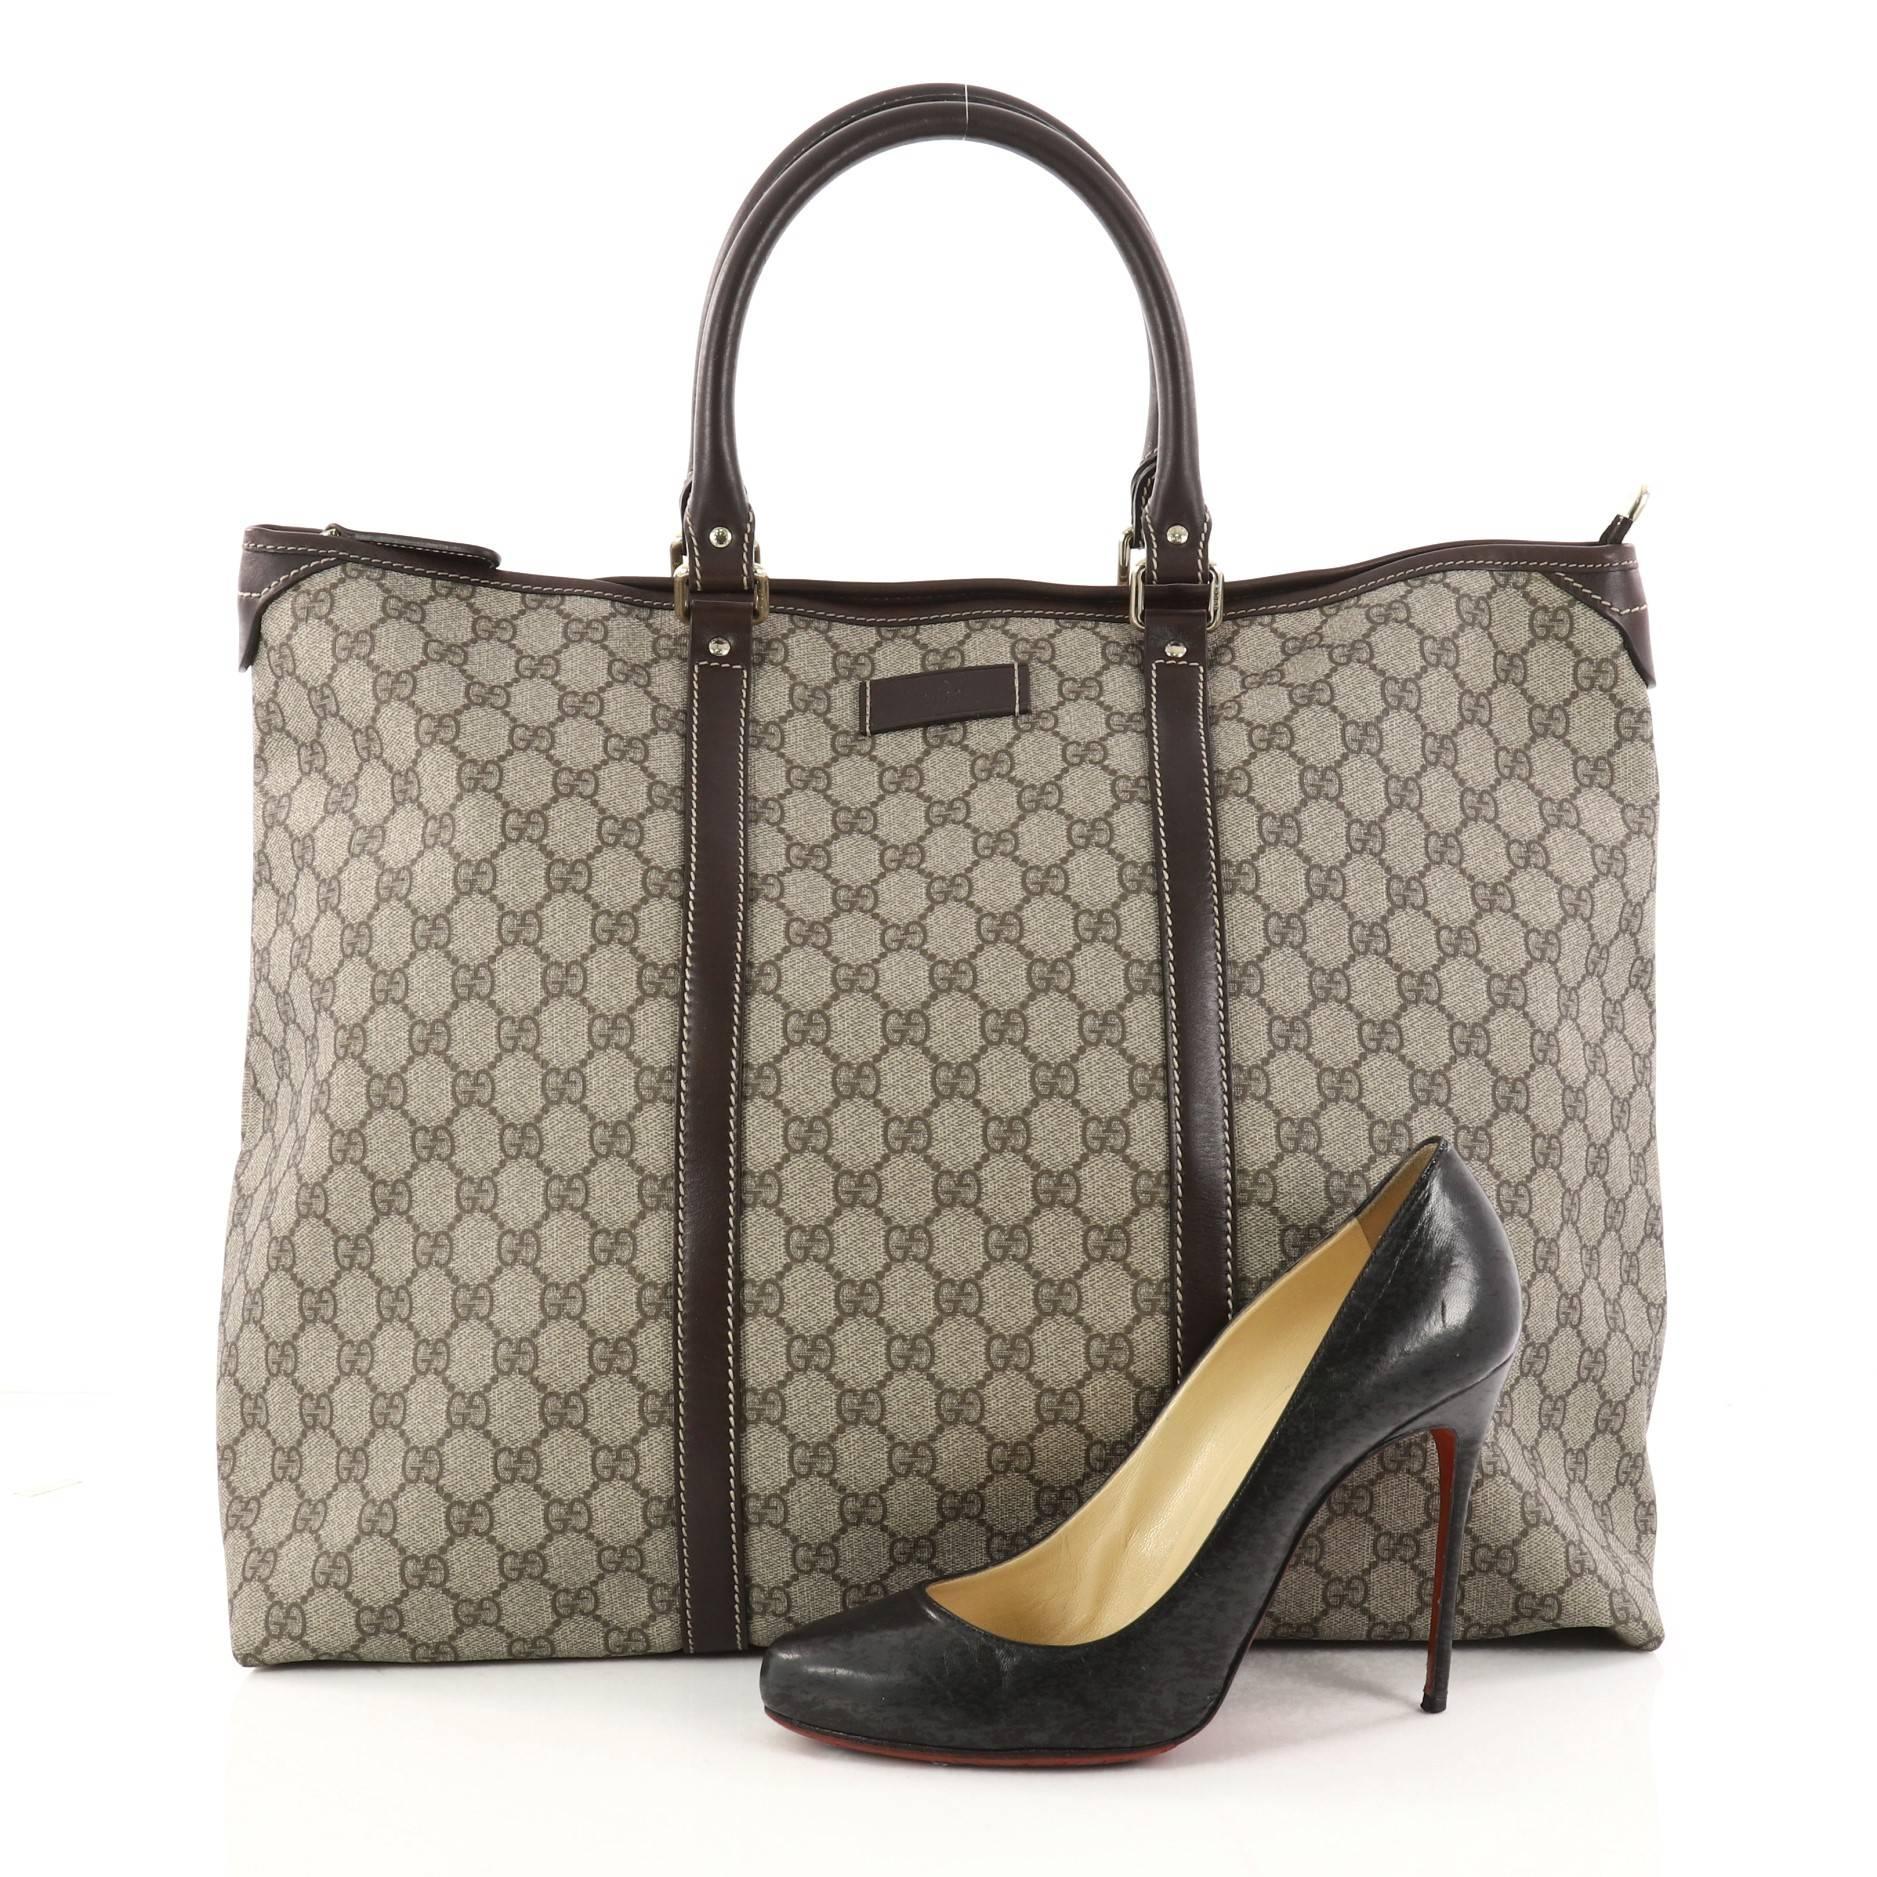 This authentic Gucci Joy Zip Top Tote GG Coated Canvas Medium is a stylish and easy-to-carry accessory for the modern traveler. Crafted in taupe GG coated canvas, this easy-to-carry tote features dual-rolled handles and goldr-tone hardware accents.